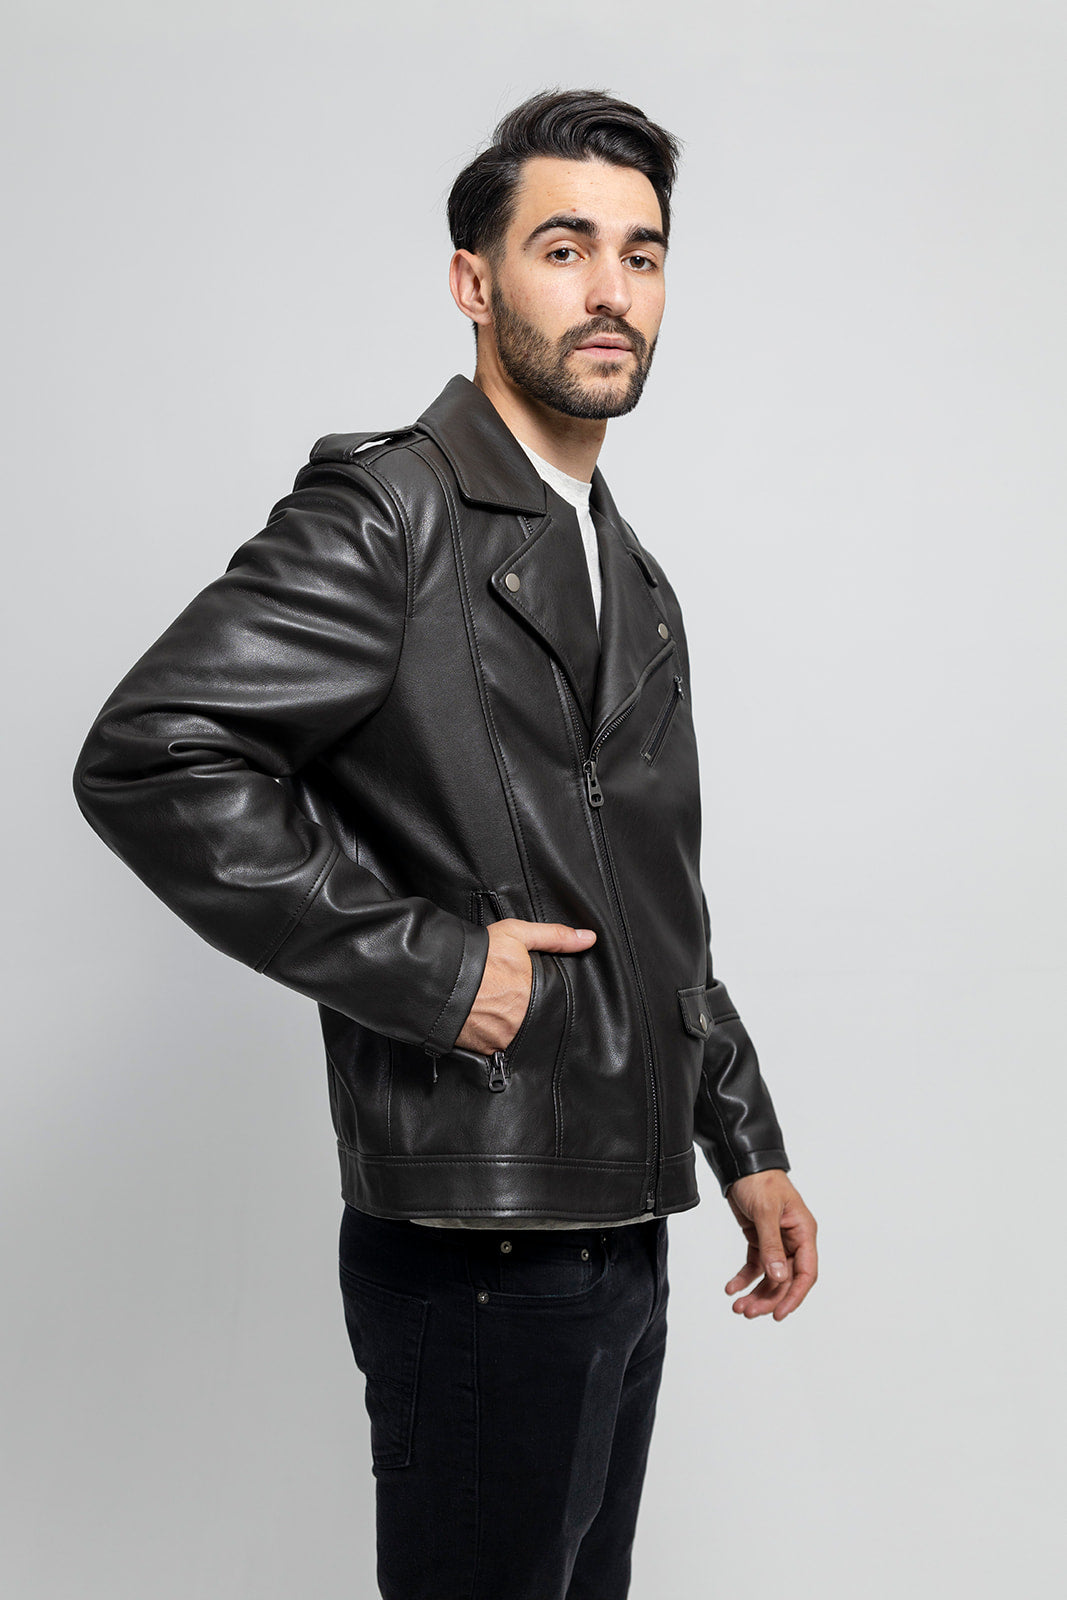 Buy Malvina Men's Faux Leather Biker Jacket with Zip, Export Quality, Full  Sleeves Vegan Jacket with Latest Unique Design (Blue, Small) at Amazon.in